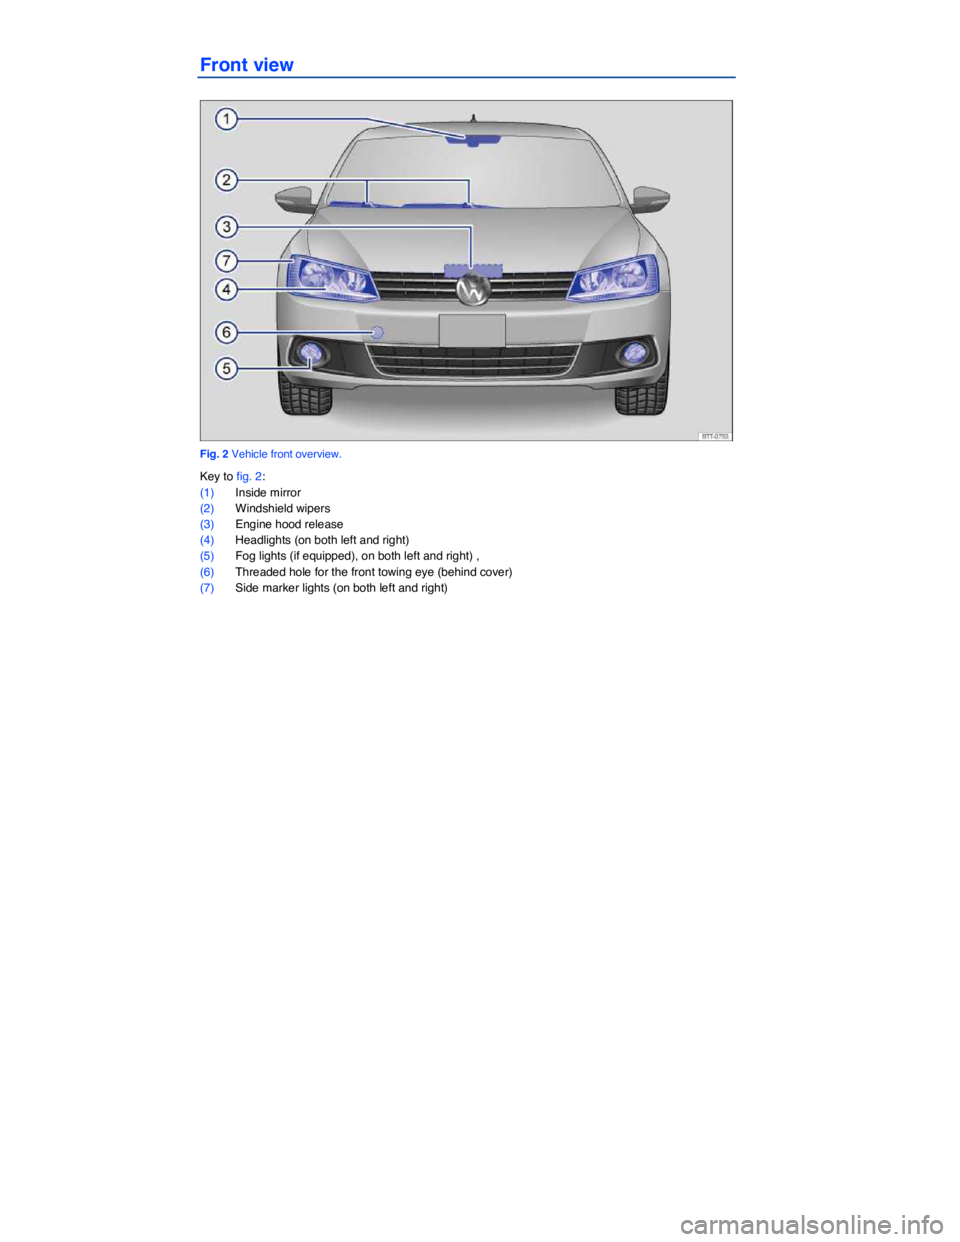 VOLKSWAGEN JETTA 2014  Owners Manual  
Front view 
 
Fig. 2 Vehicle front overview. 
Key to fig. 2: 
(1) Inside mirror  
(2) Windshield wipers  
(3) Engine hood release  
(4) Headlights (on both left and right)  
(5) Fog lights (if equip